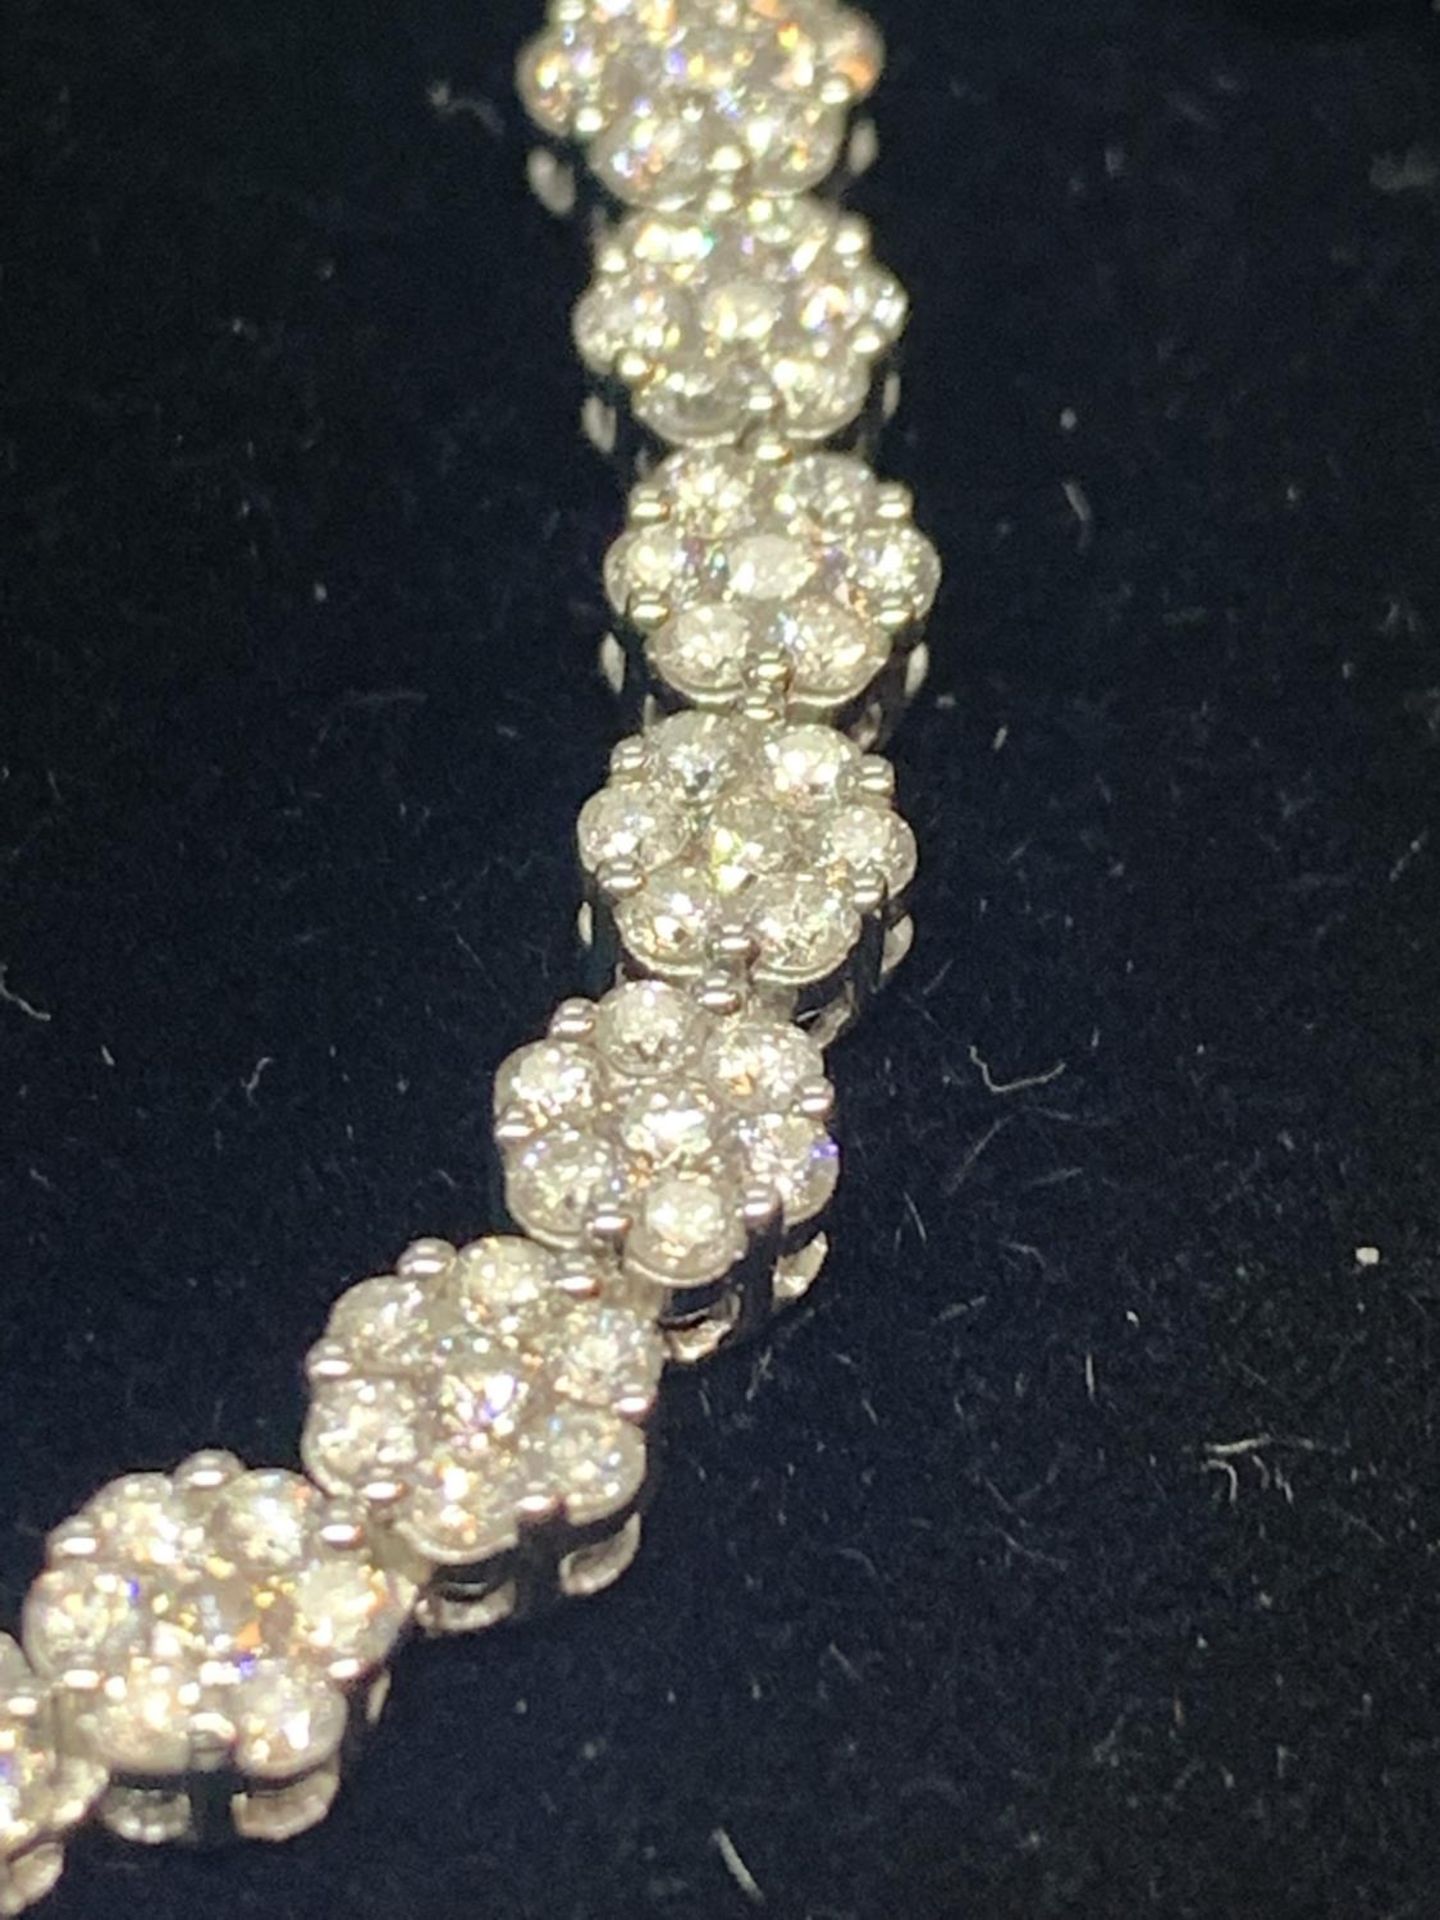 AN 18 CARAT WHITE GOLD NECKLACE WITH 10 CARAT OF DIAMONDS LENGTH APPROXIMATELY 43CM - Image 6 of 10